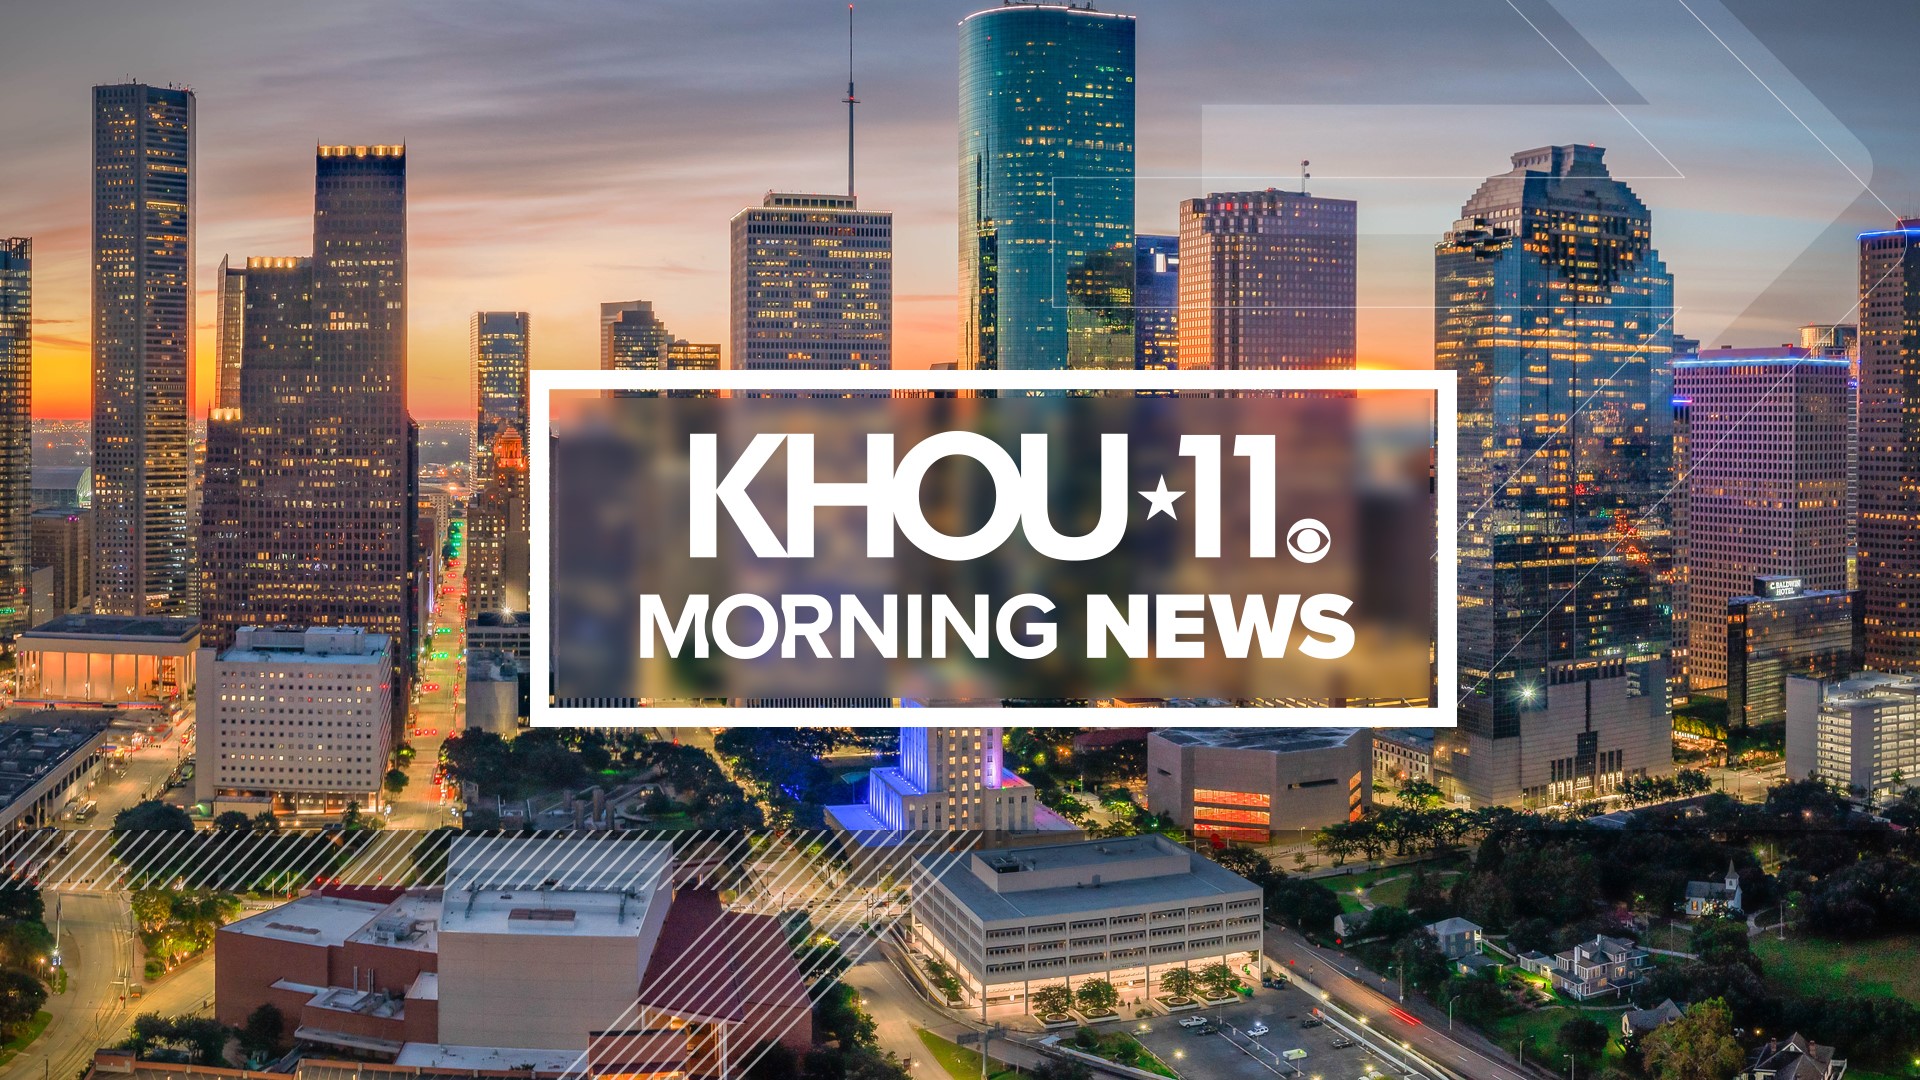 Houston morning newscast featuring breaking news from overnight, local weather and special reports. KHOU Stands for Houston.